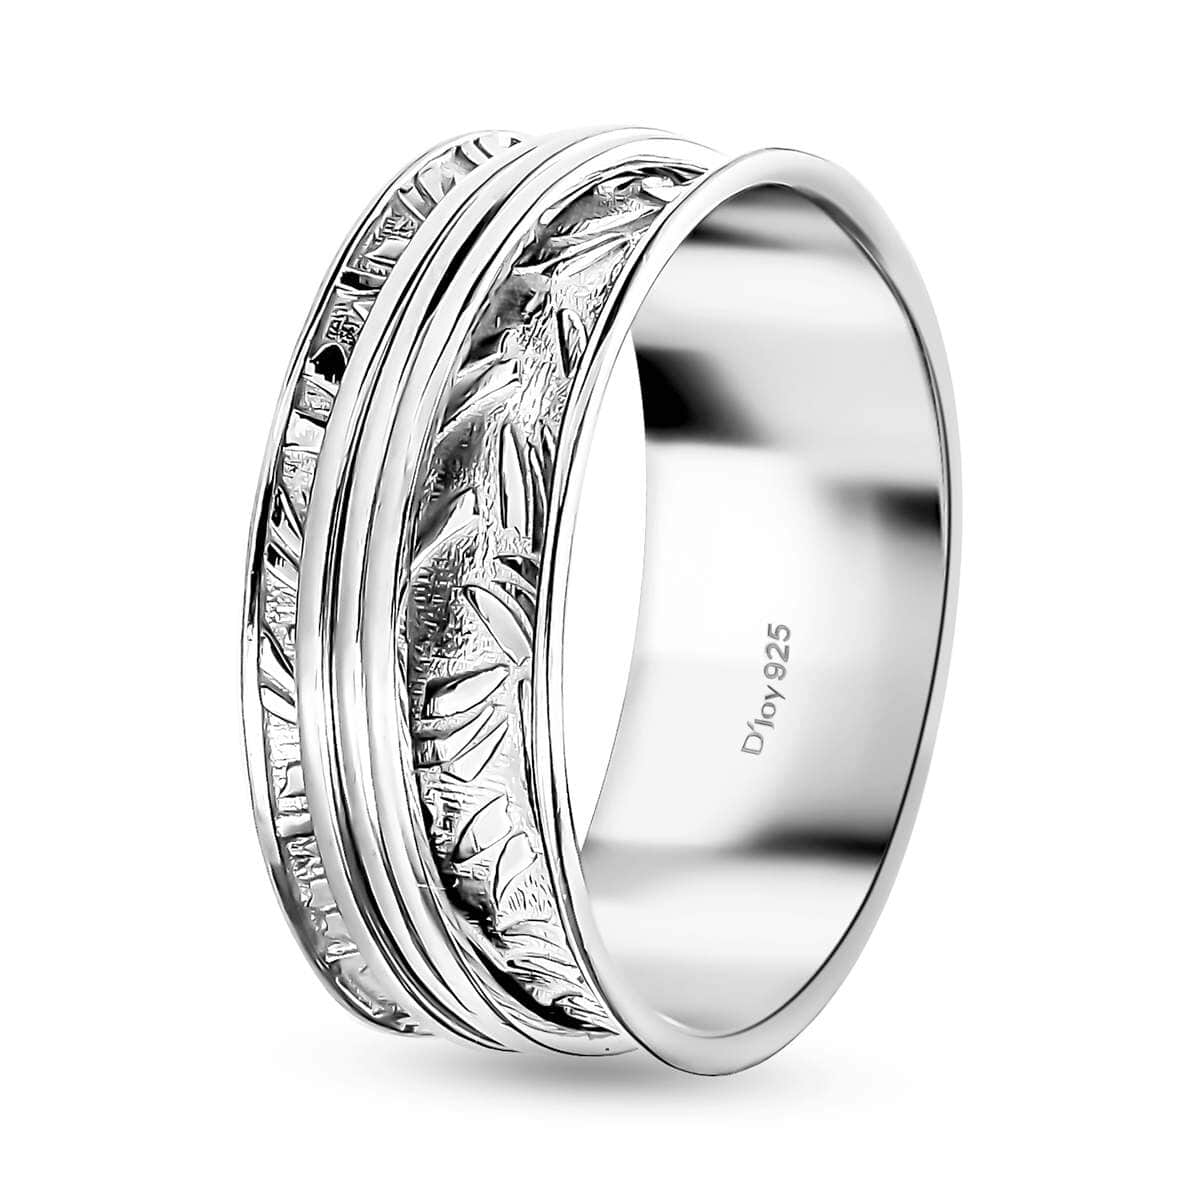 Sterling Silver Spinner Ring, Anxiety Ring for Women, Fidget Rings for Anxiety for Women, Stress Relieving Anxiety Ring (Size 8.0) 5.85 Grams image number 5